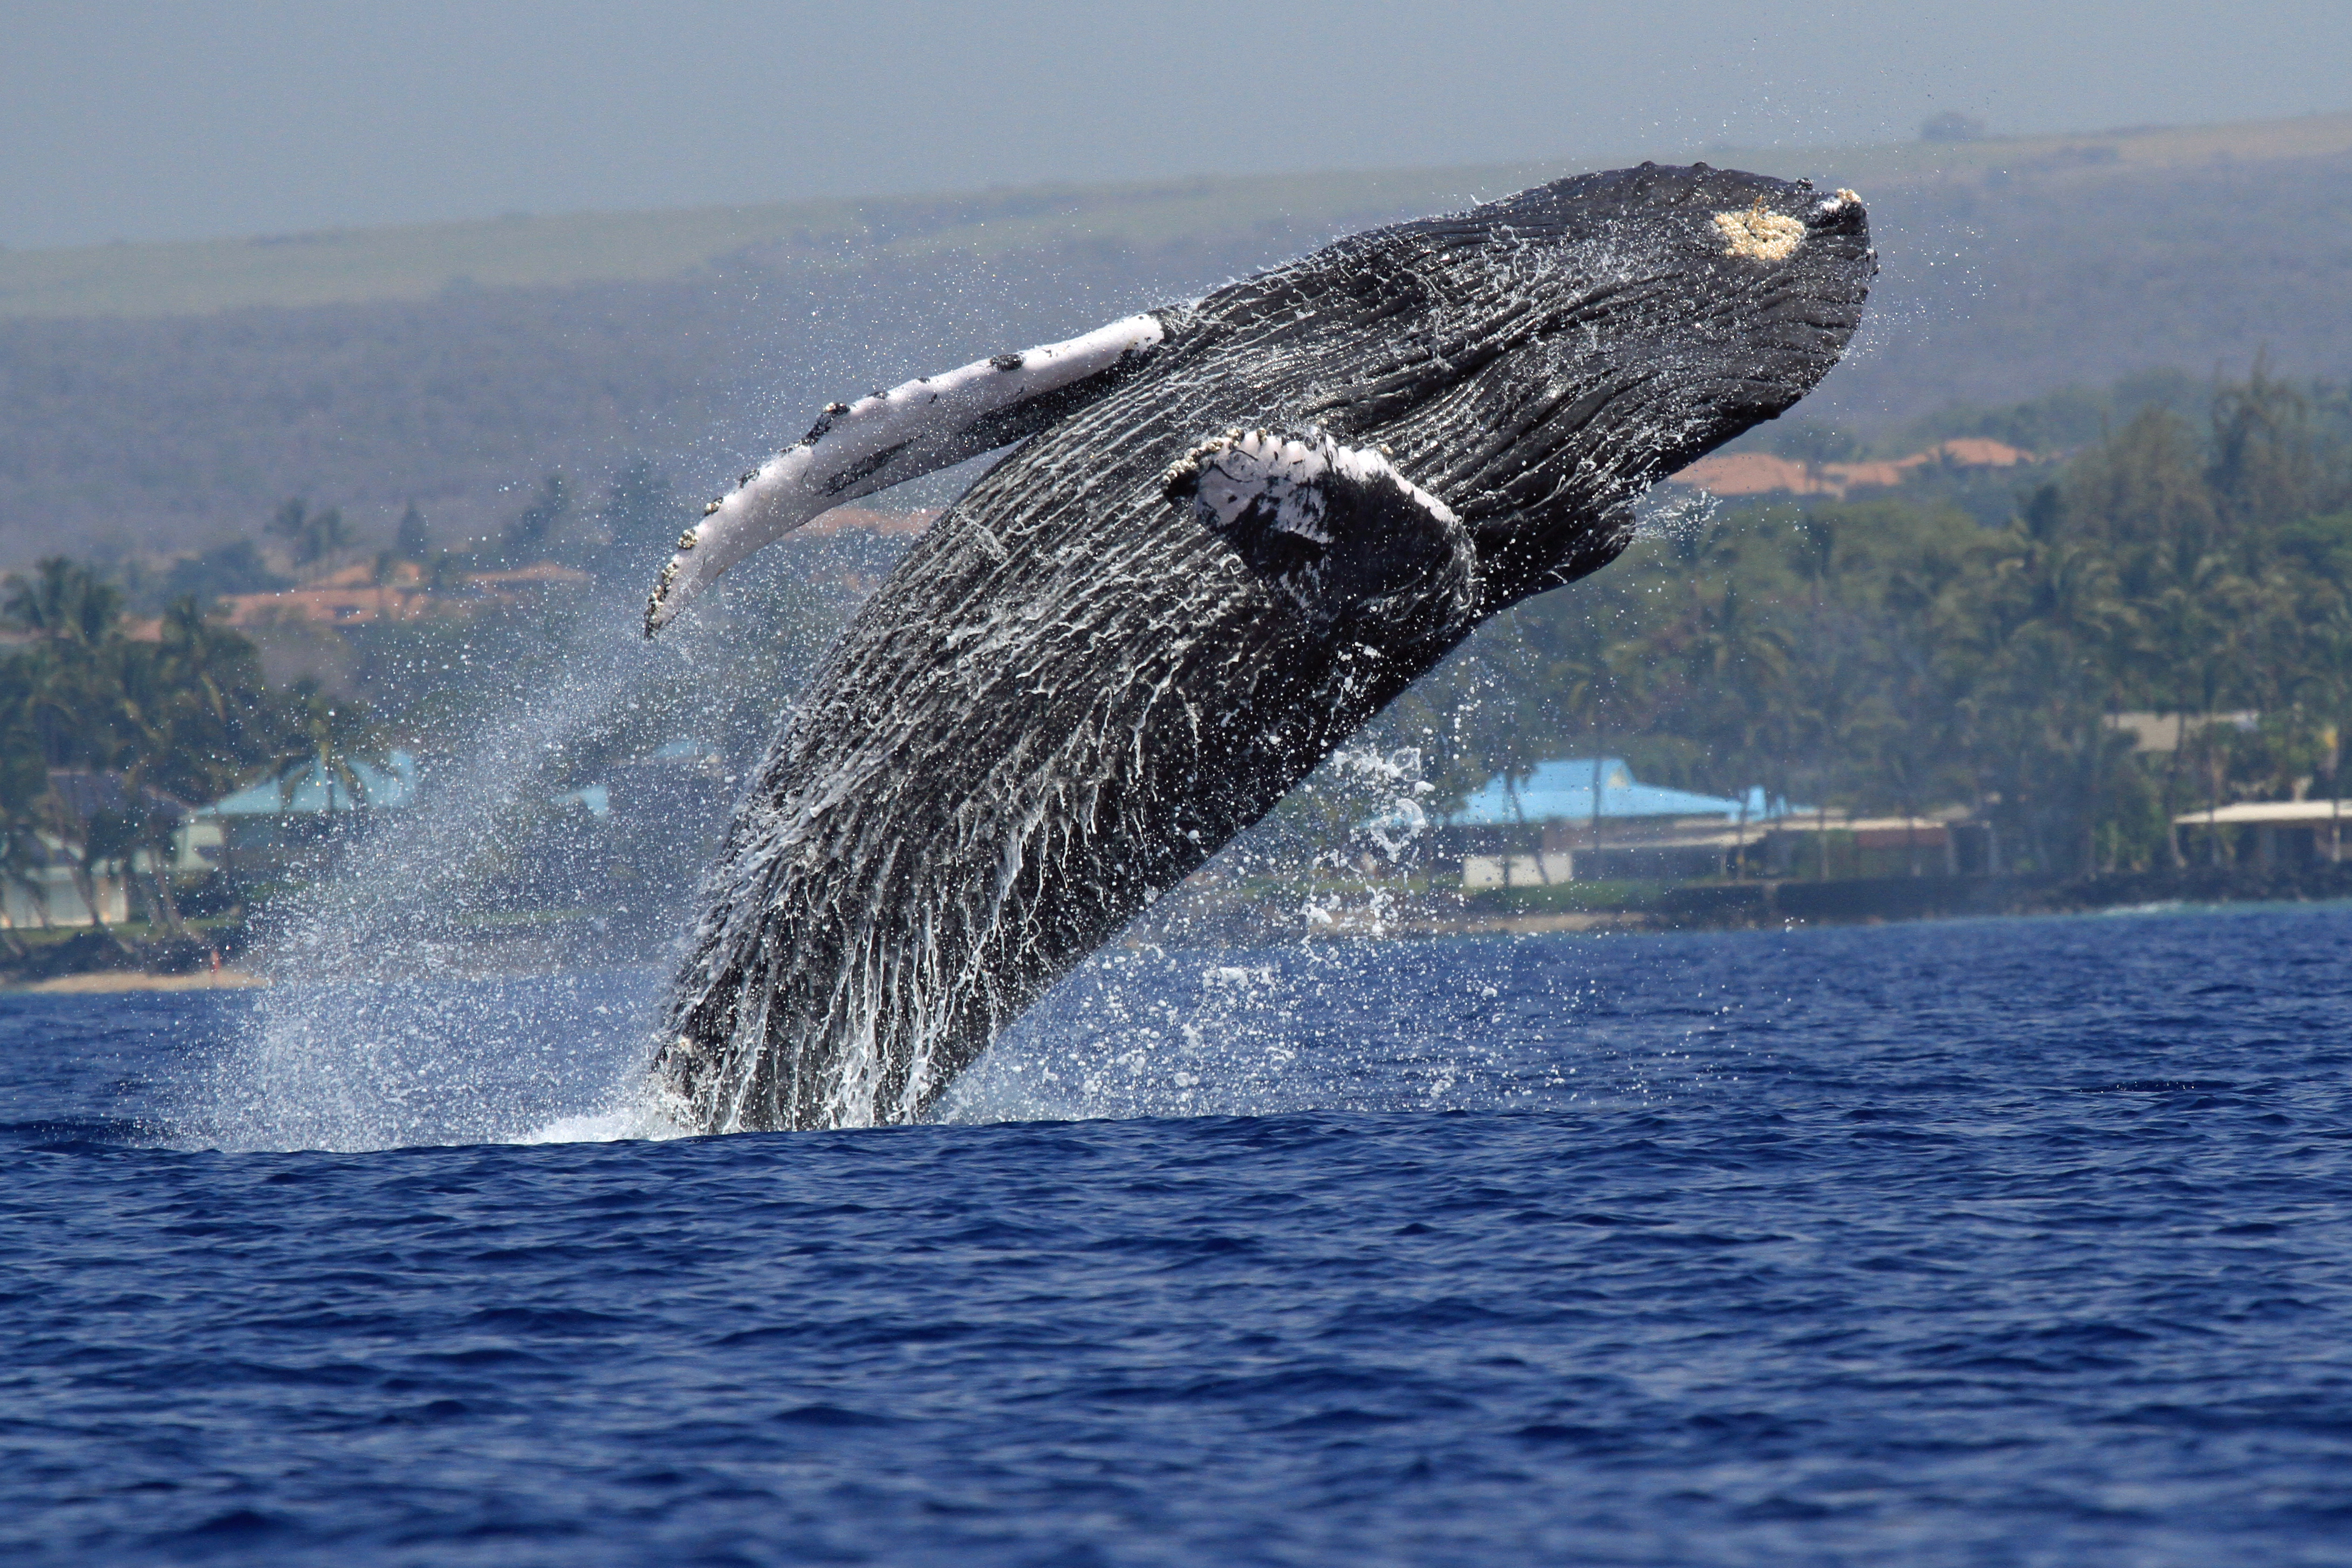 Ellen Raimo captured this image of breaching humpback swimming in Maui waters on March 3, 2016. She called it the best day of the season for whale photography with lots of activity reported on the water that day. Courtesy photo.